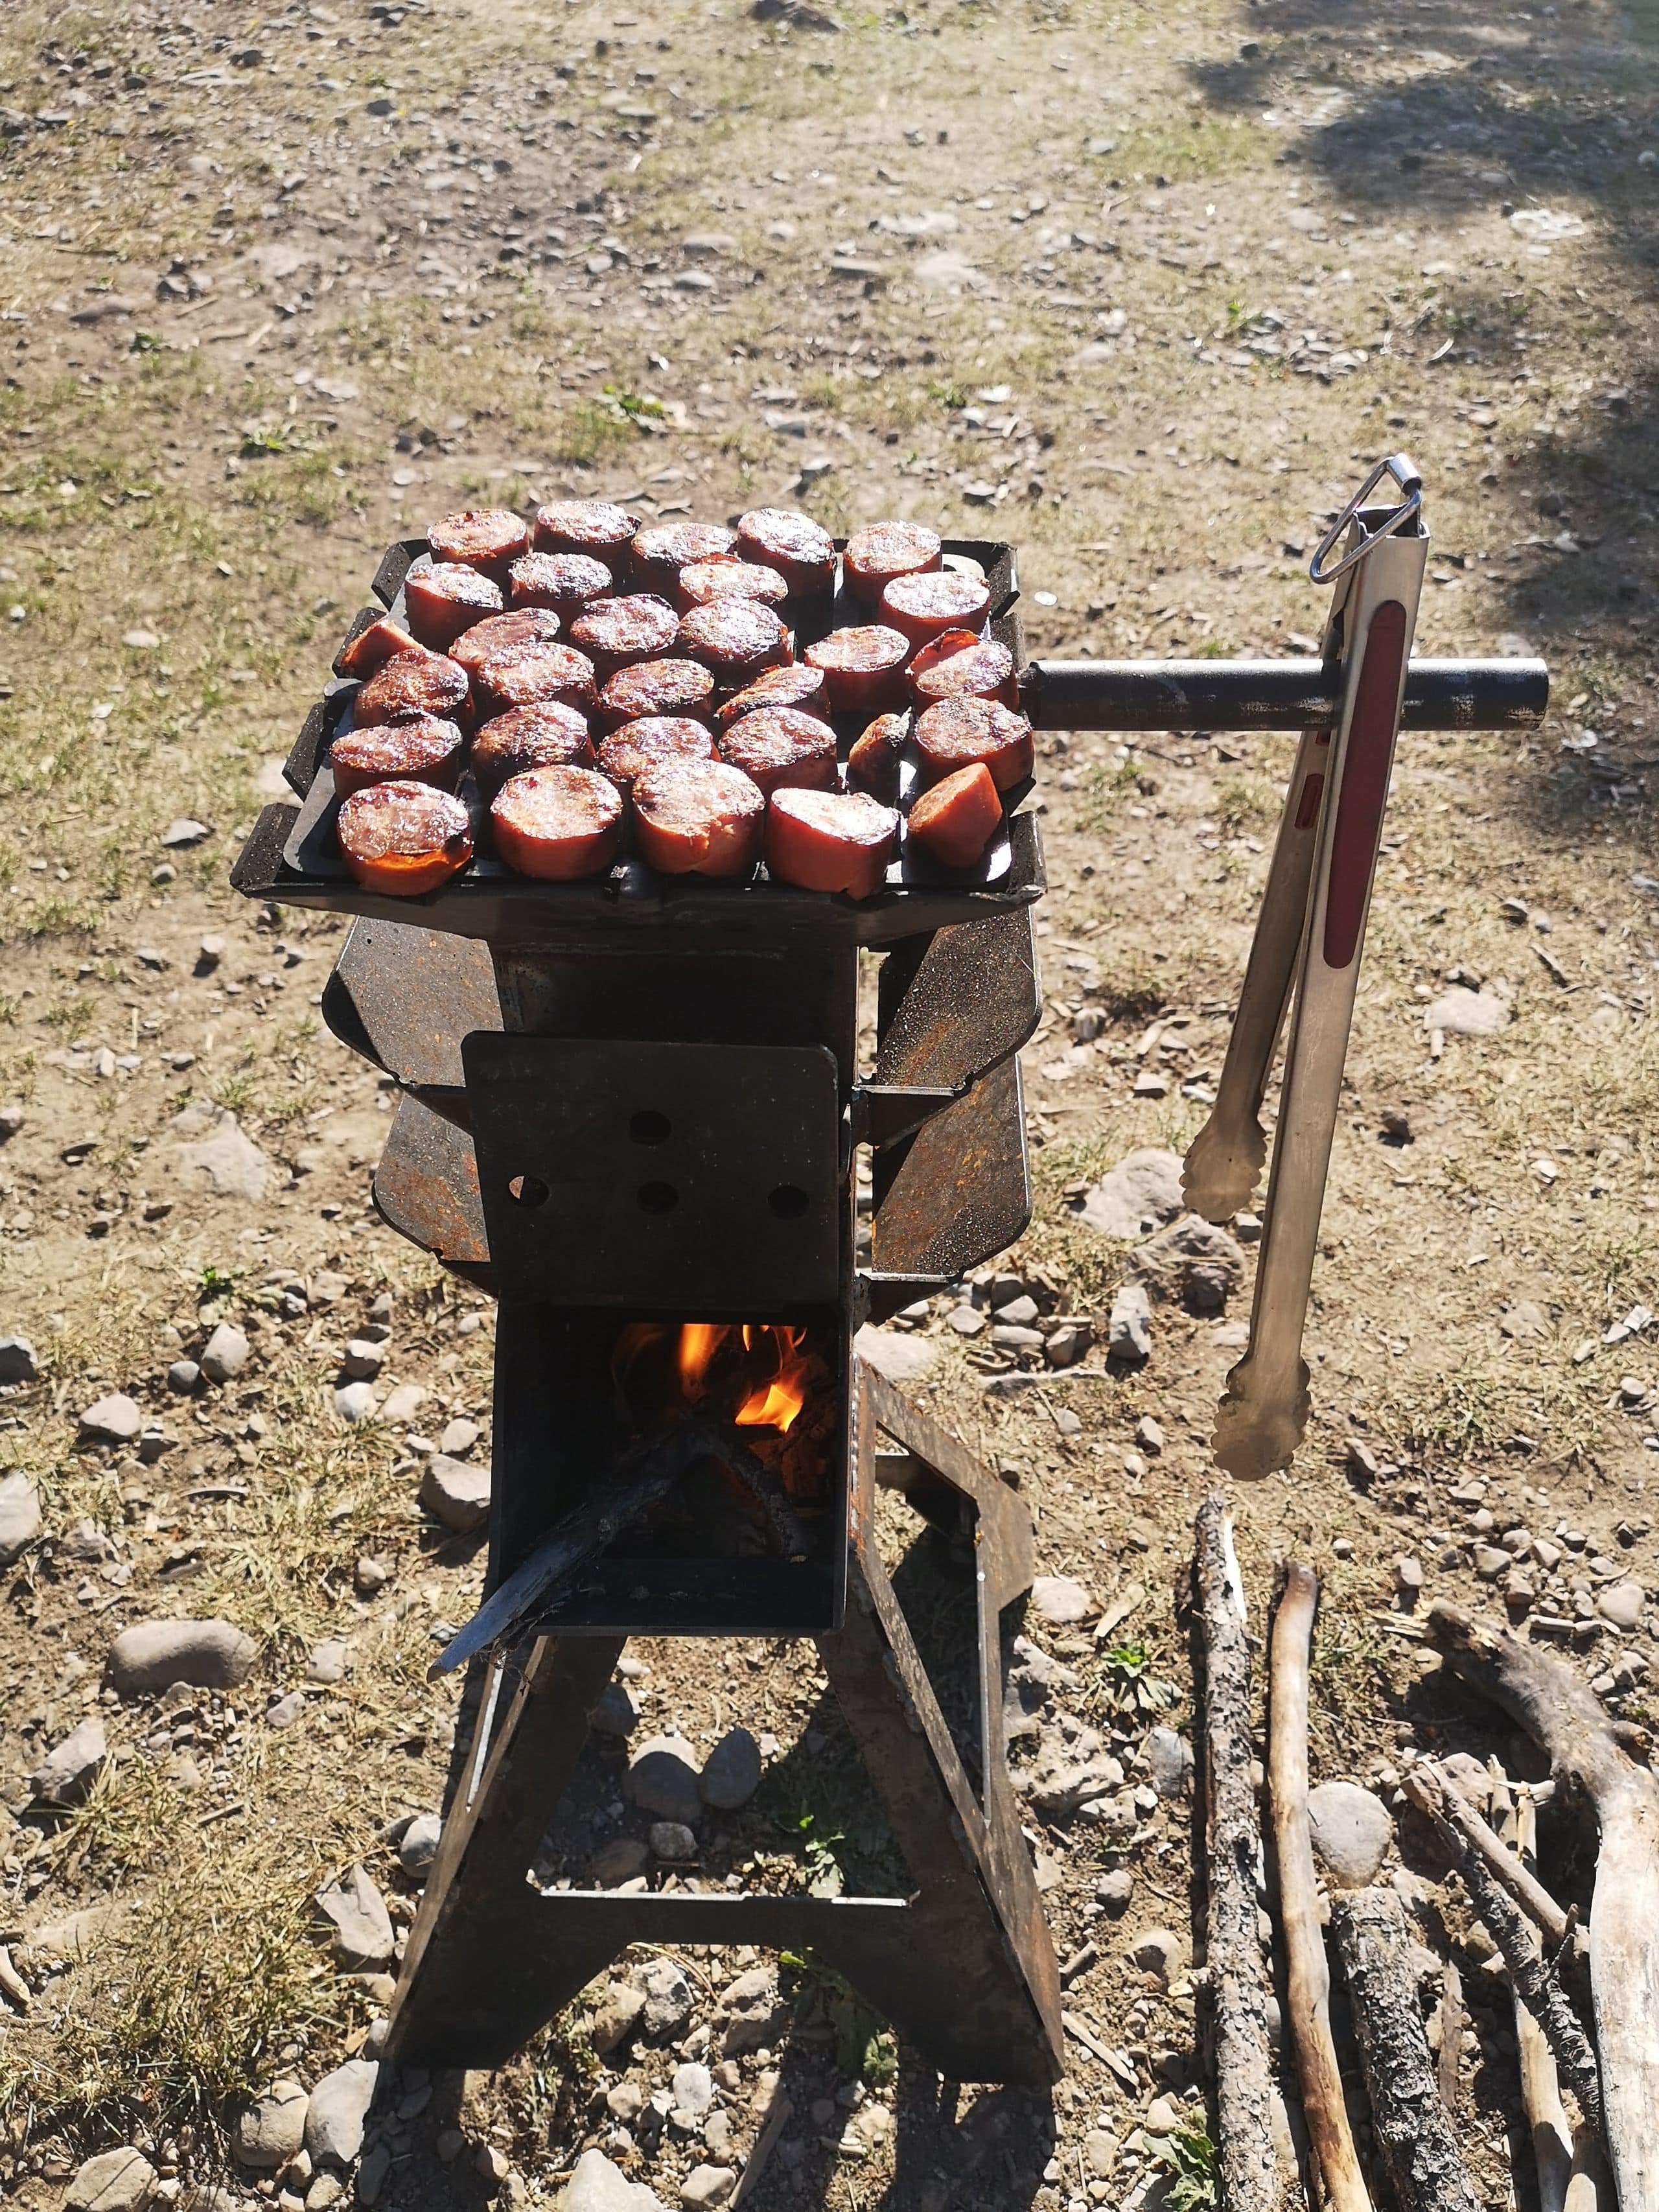 cooking on the rocket stove